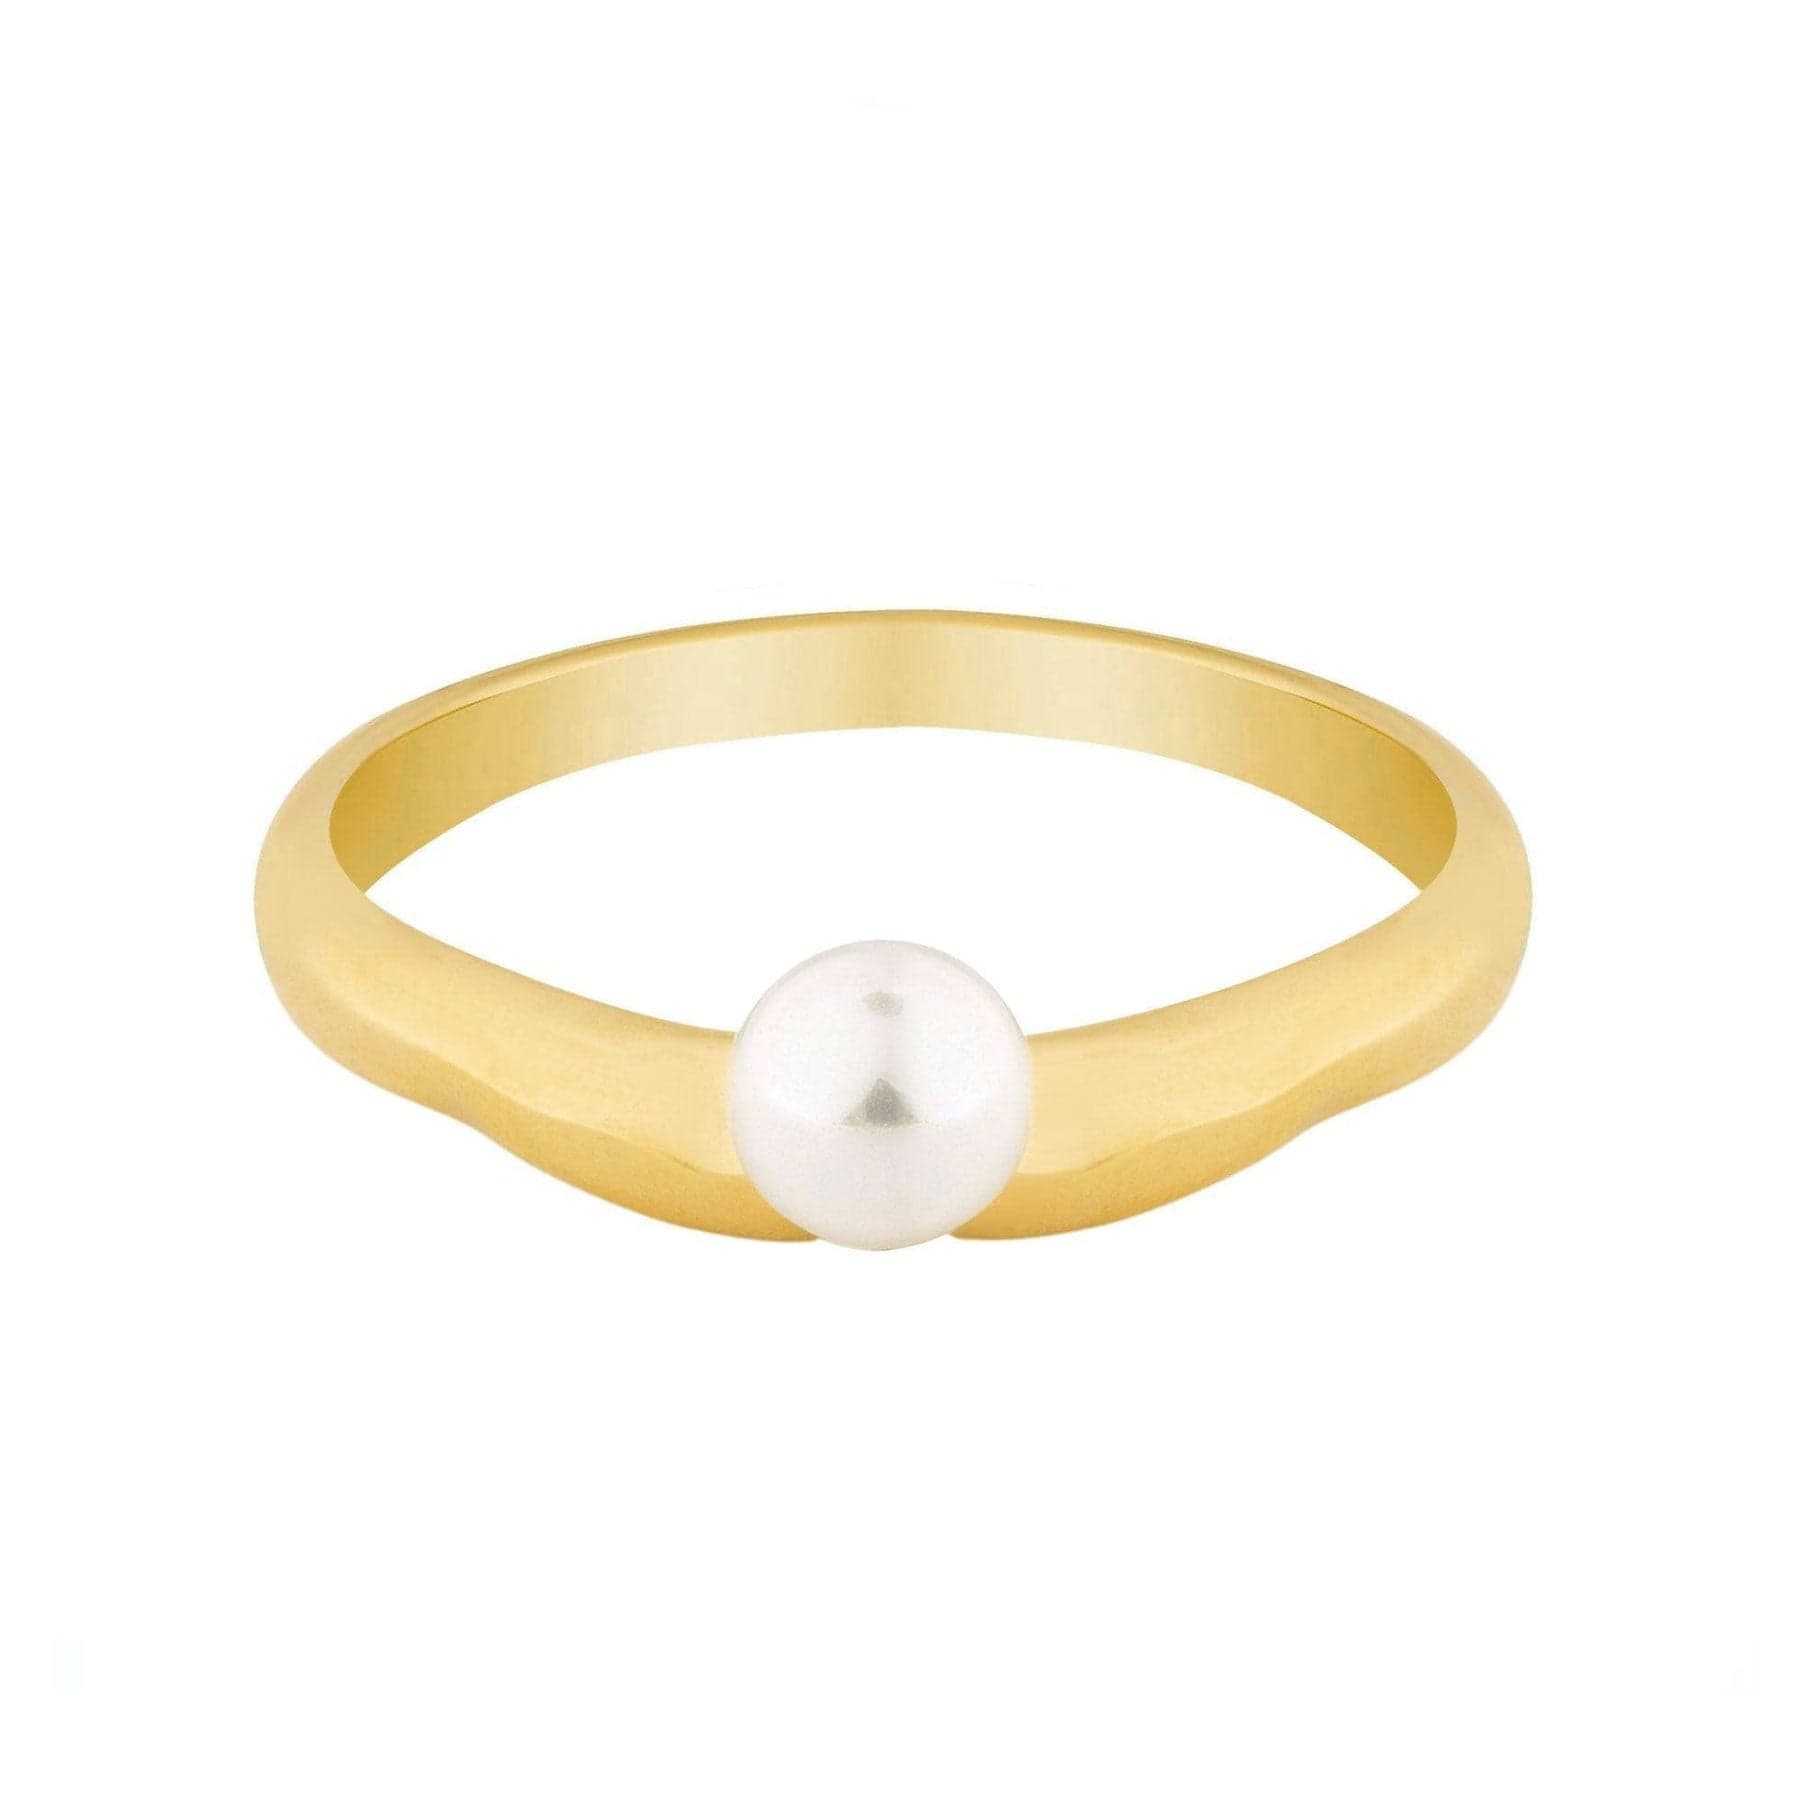 BohoMoon Stainless Steel Amaya Pearl Ring Gold / US 6 / UK L / EUR 51 (small)